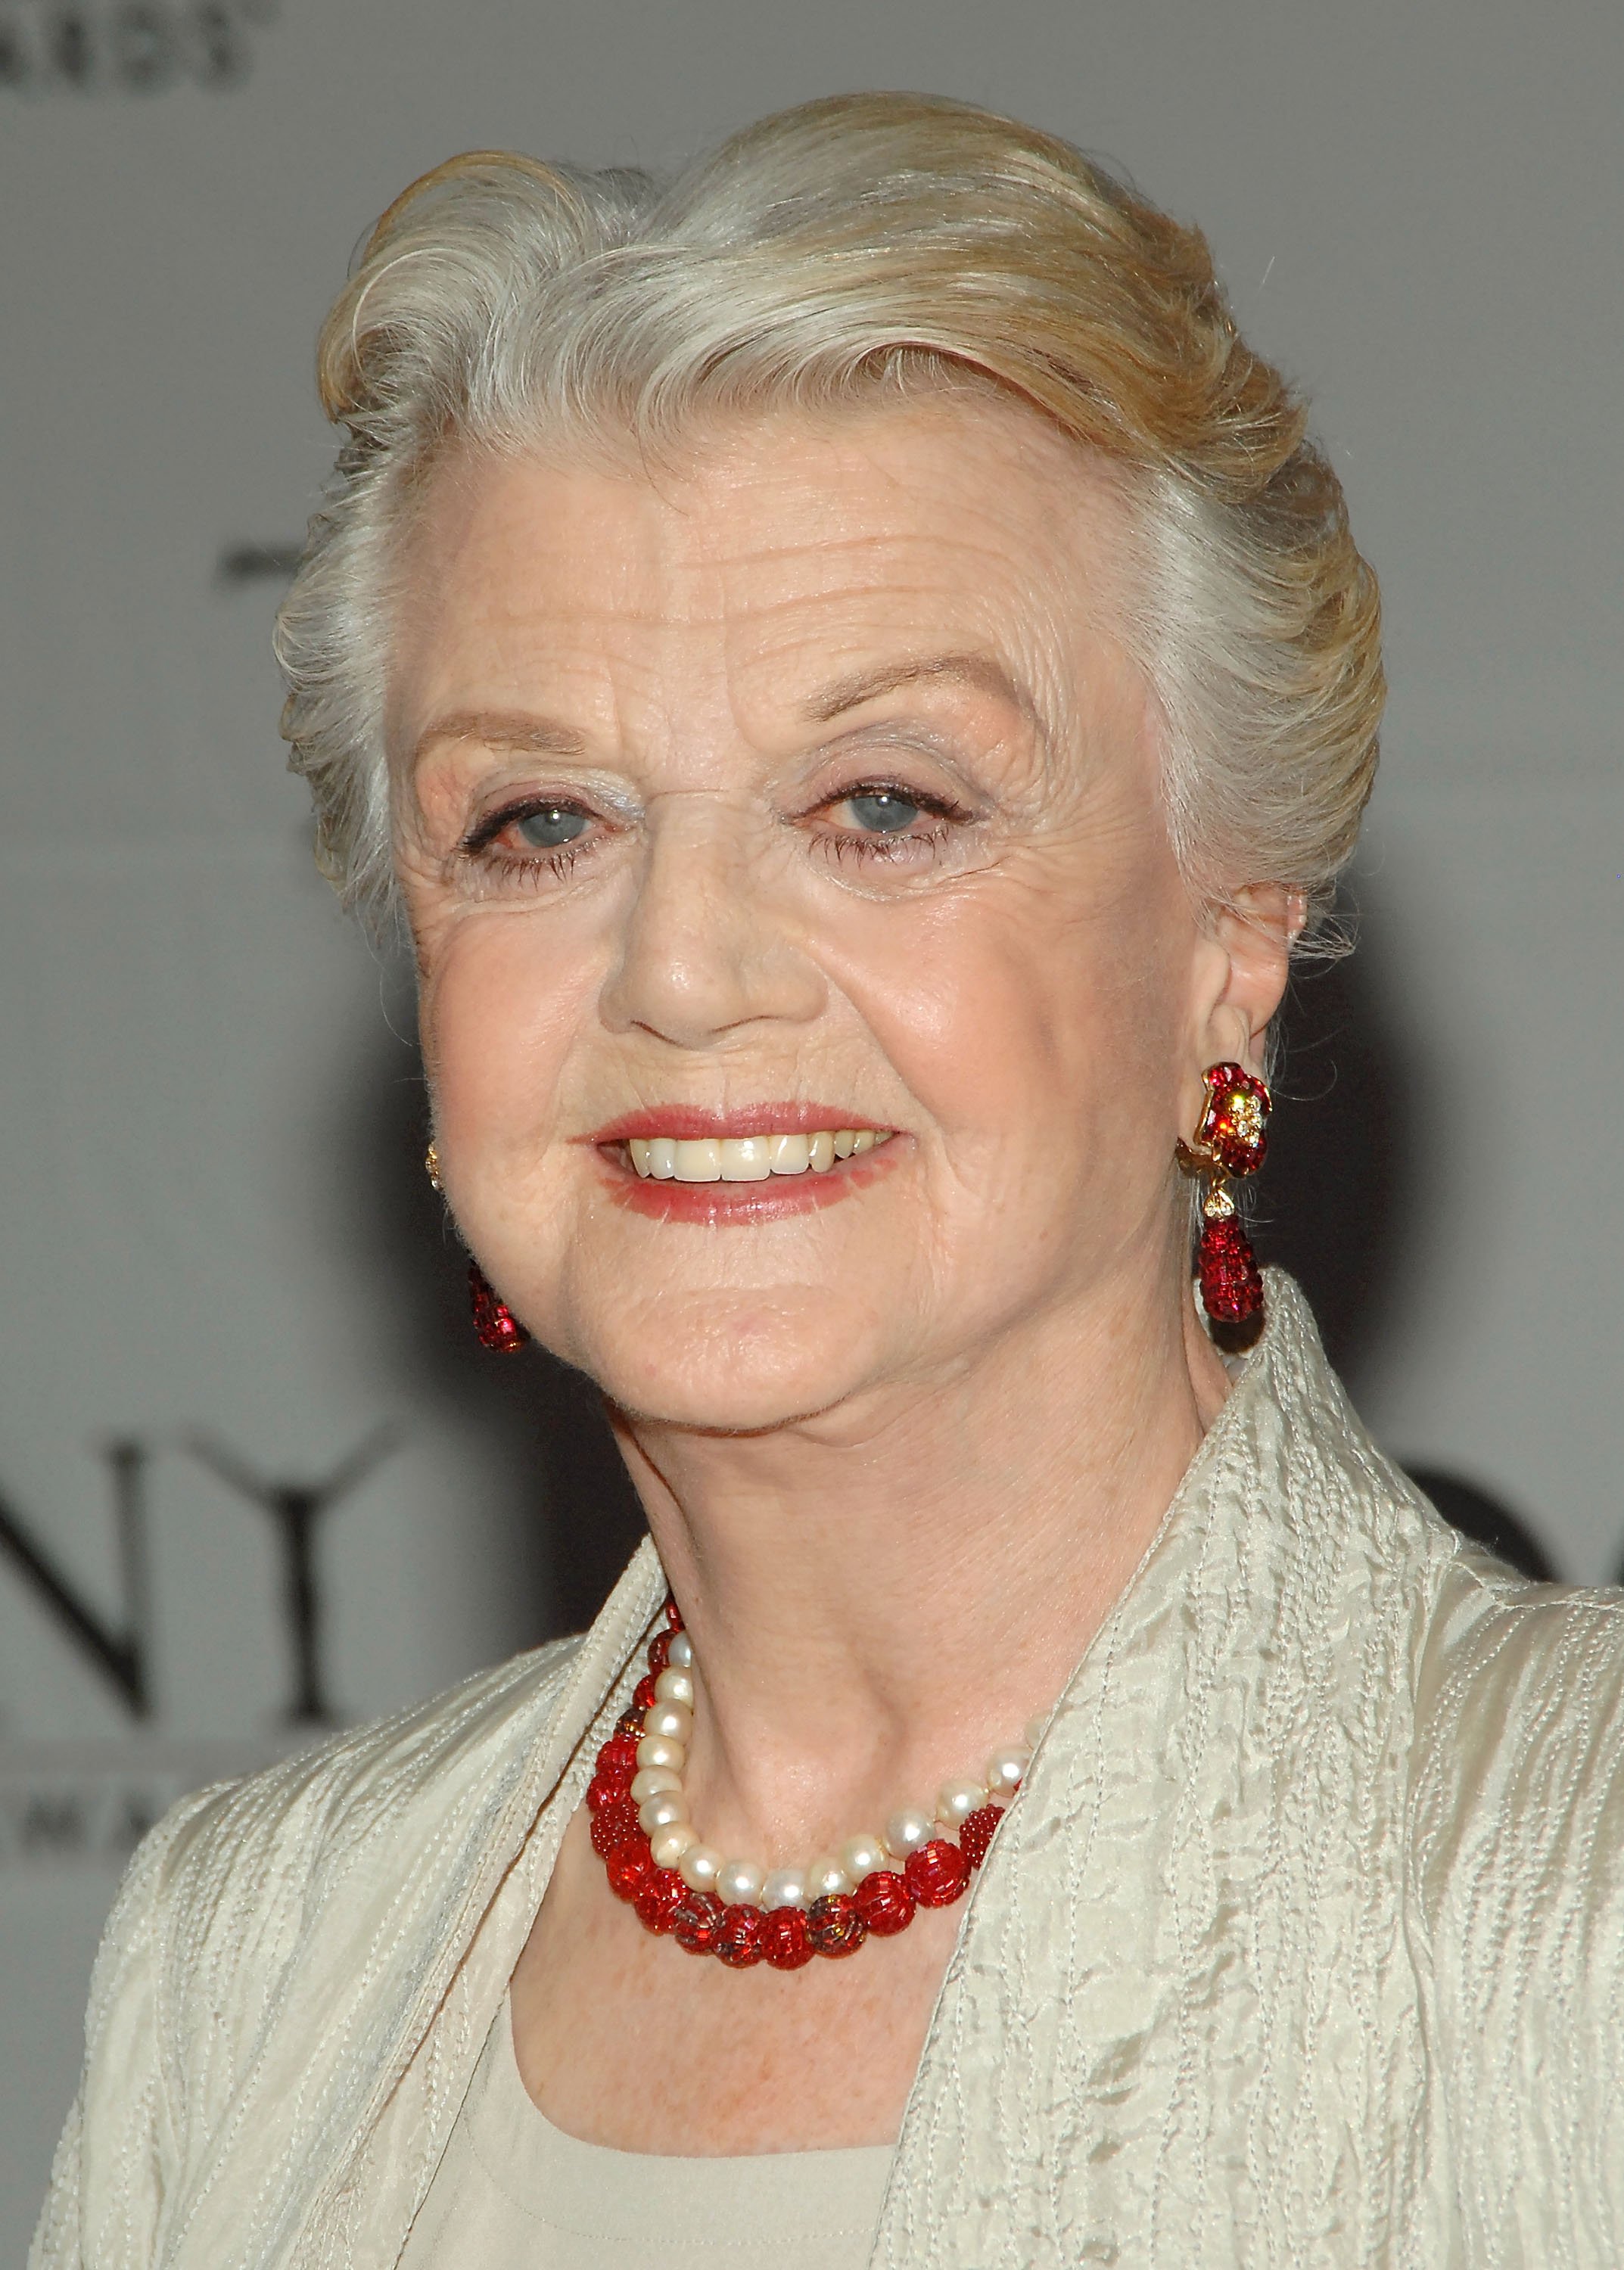 Angela Lansbury attends the 61st Annual Tony Awards at Radio City Music Hall on June 10, 2007, in New York City. | Source: Getty Images